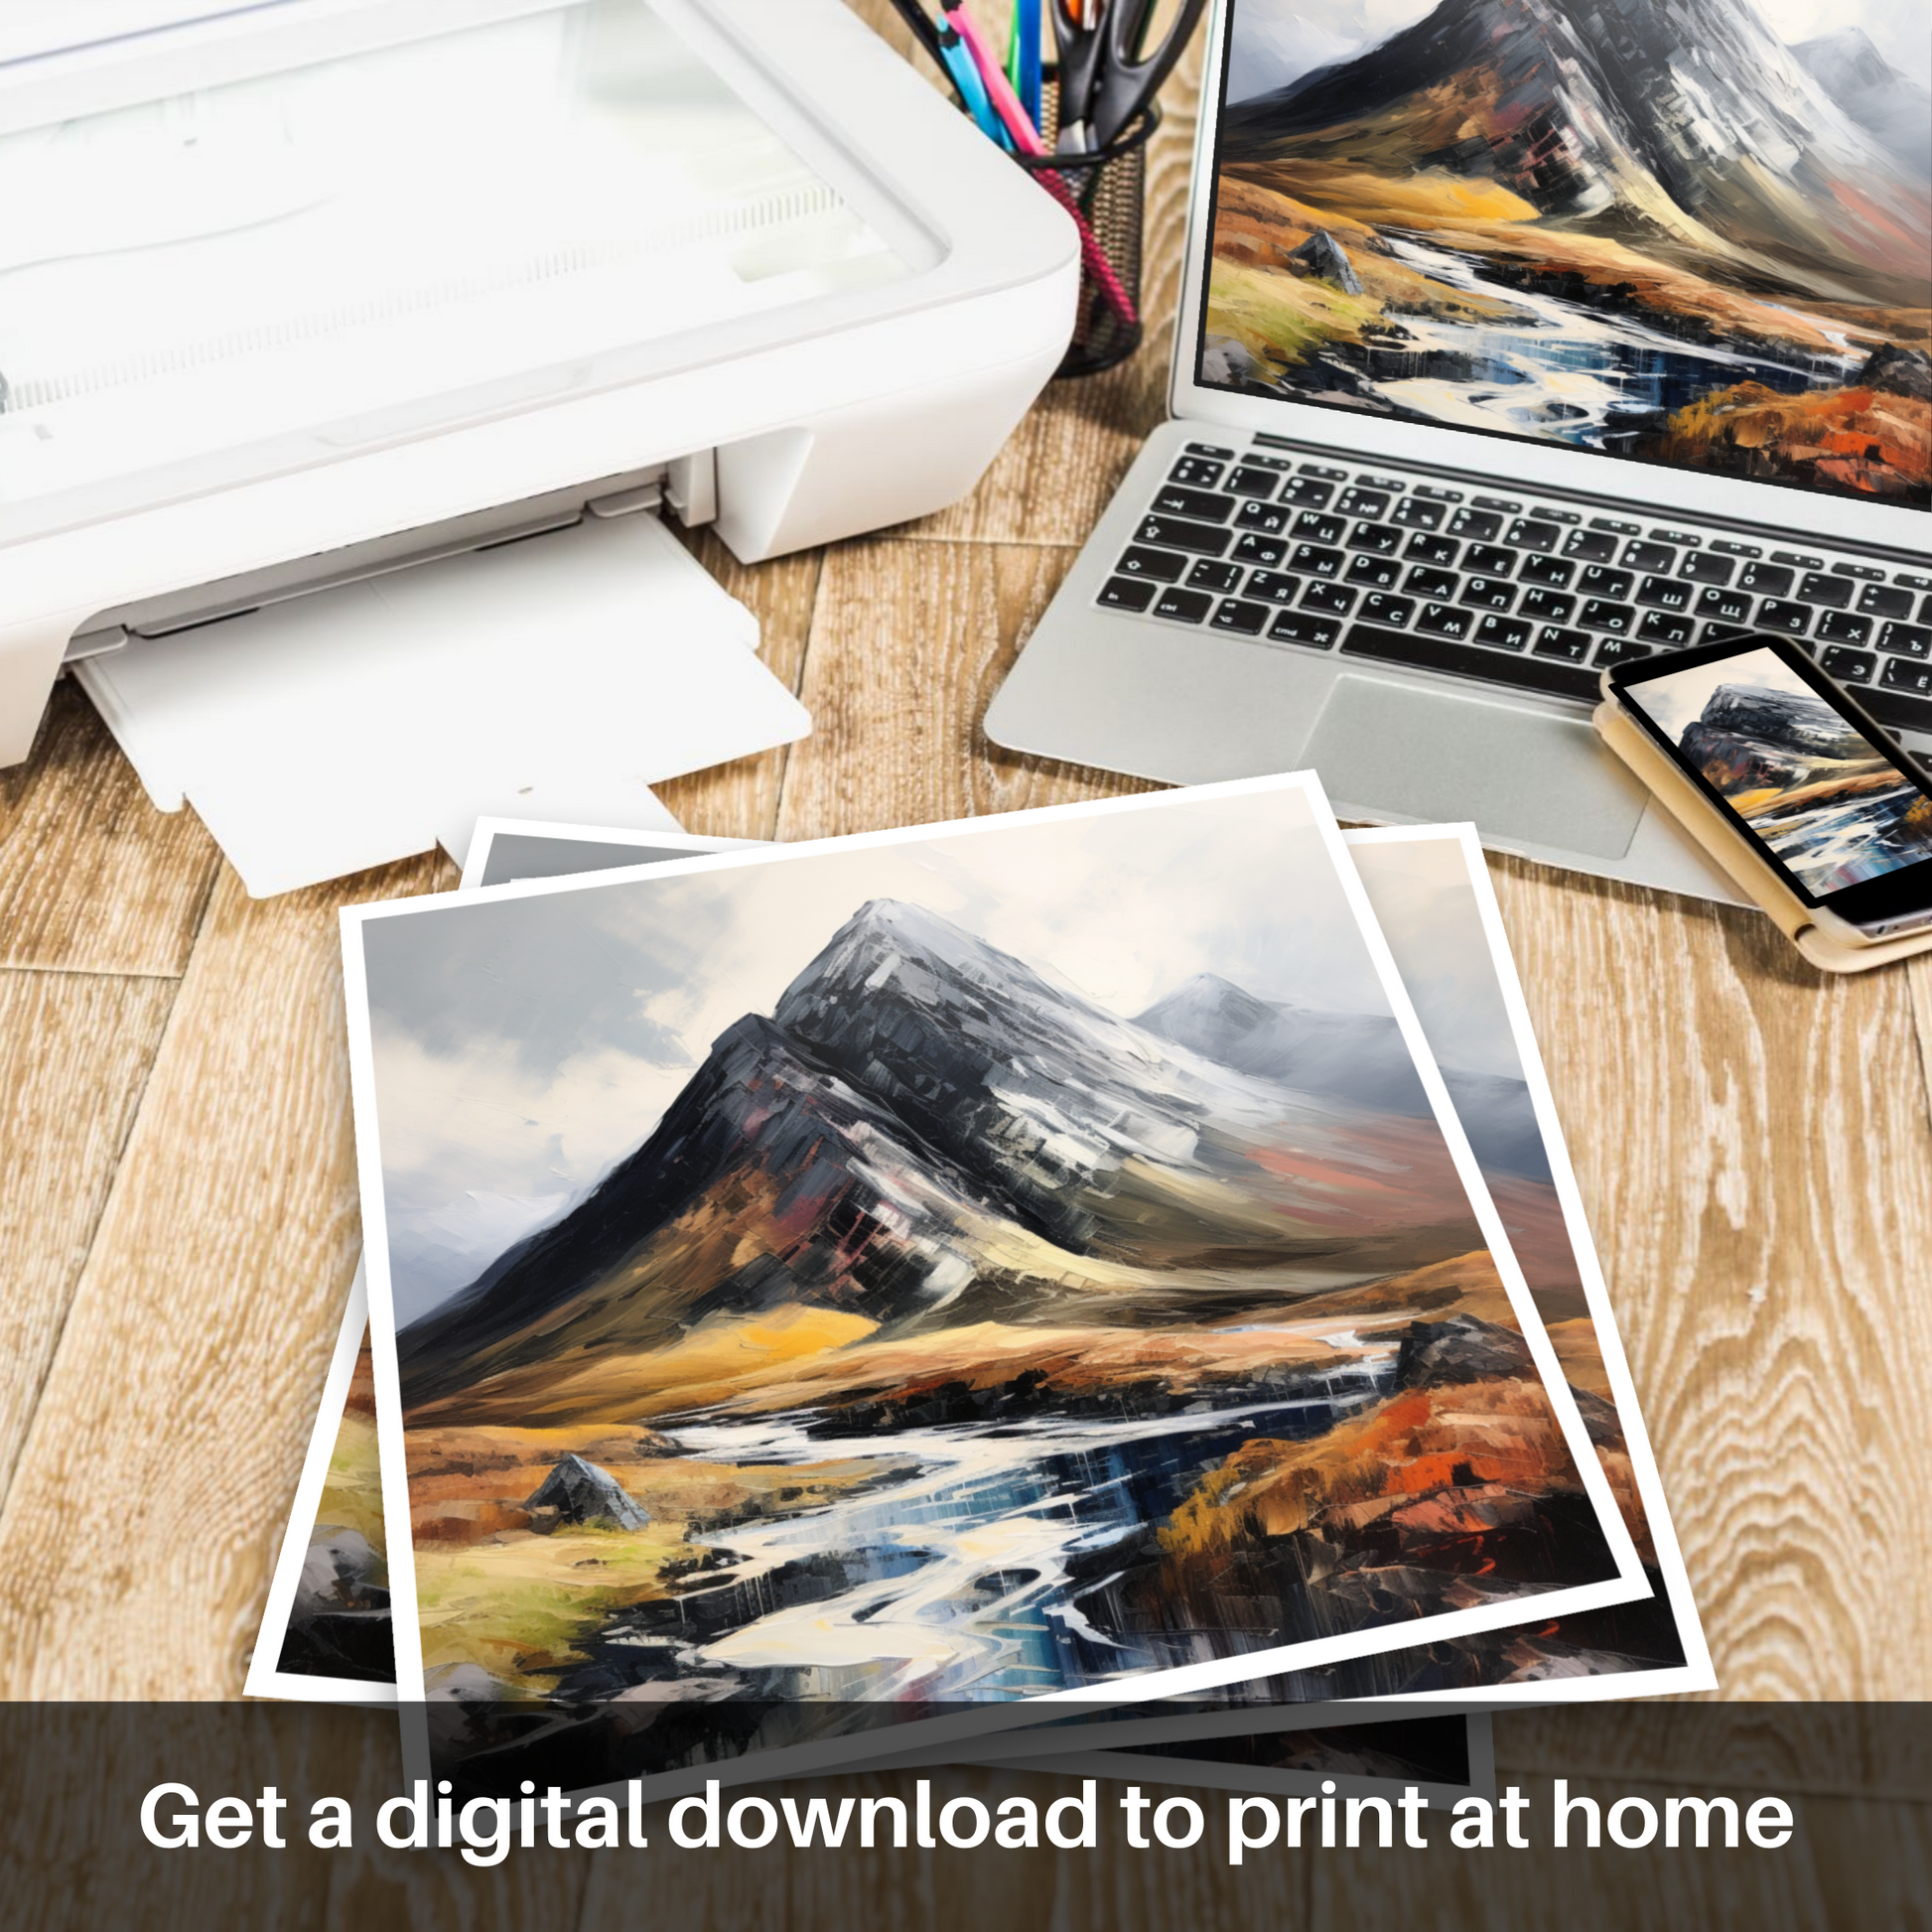 Downloadable and printable picture of Stob Dubh (Buachaille Etive Beag)